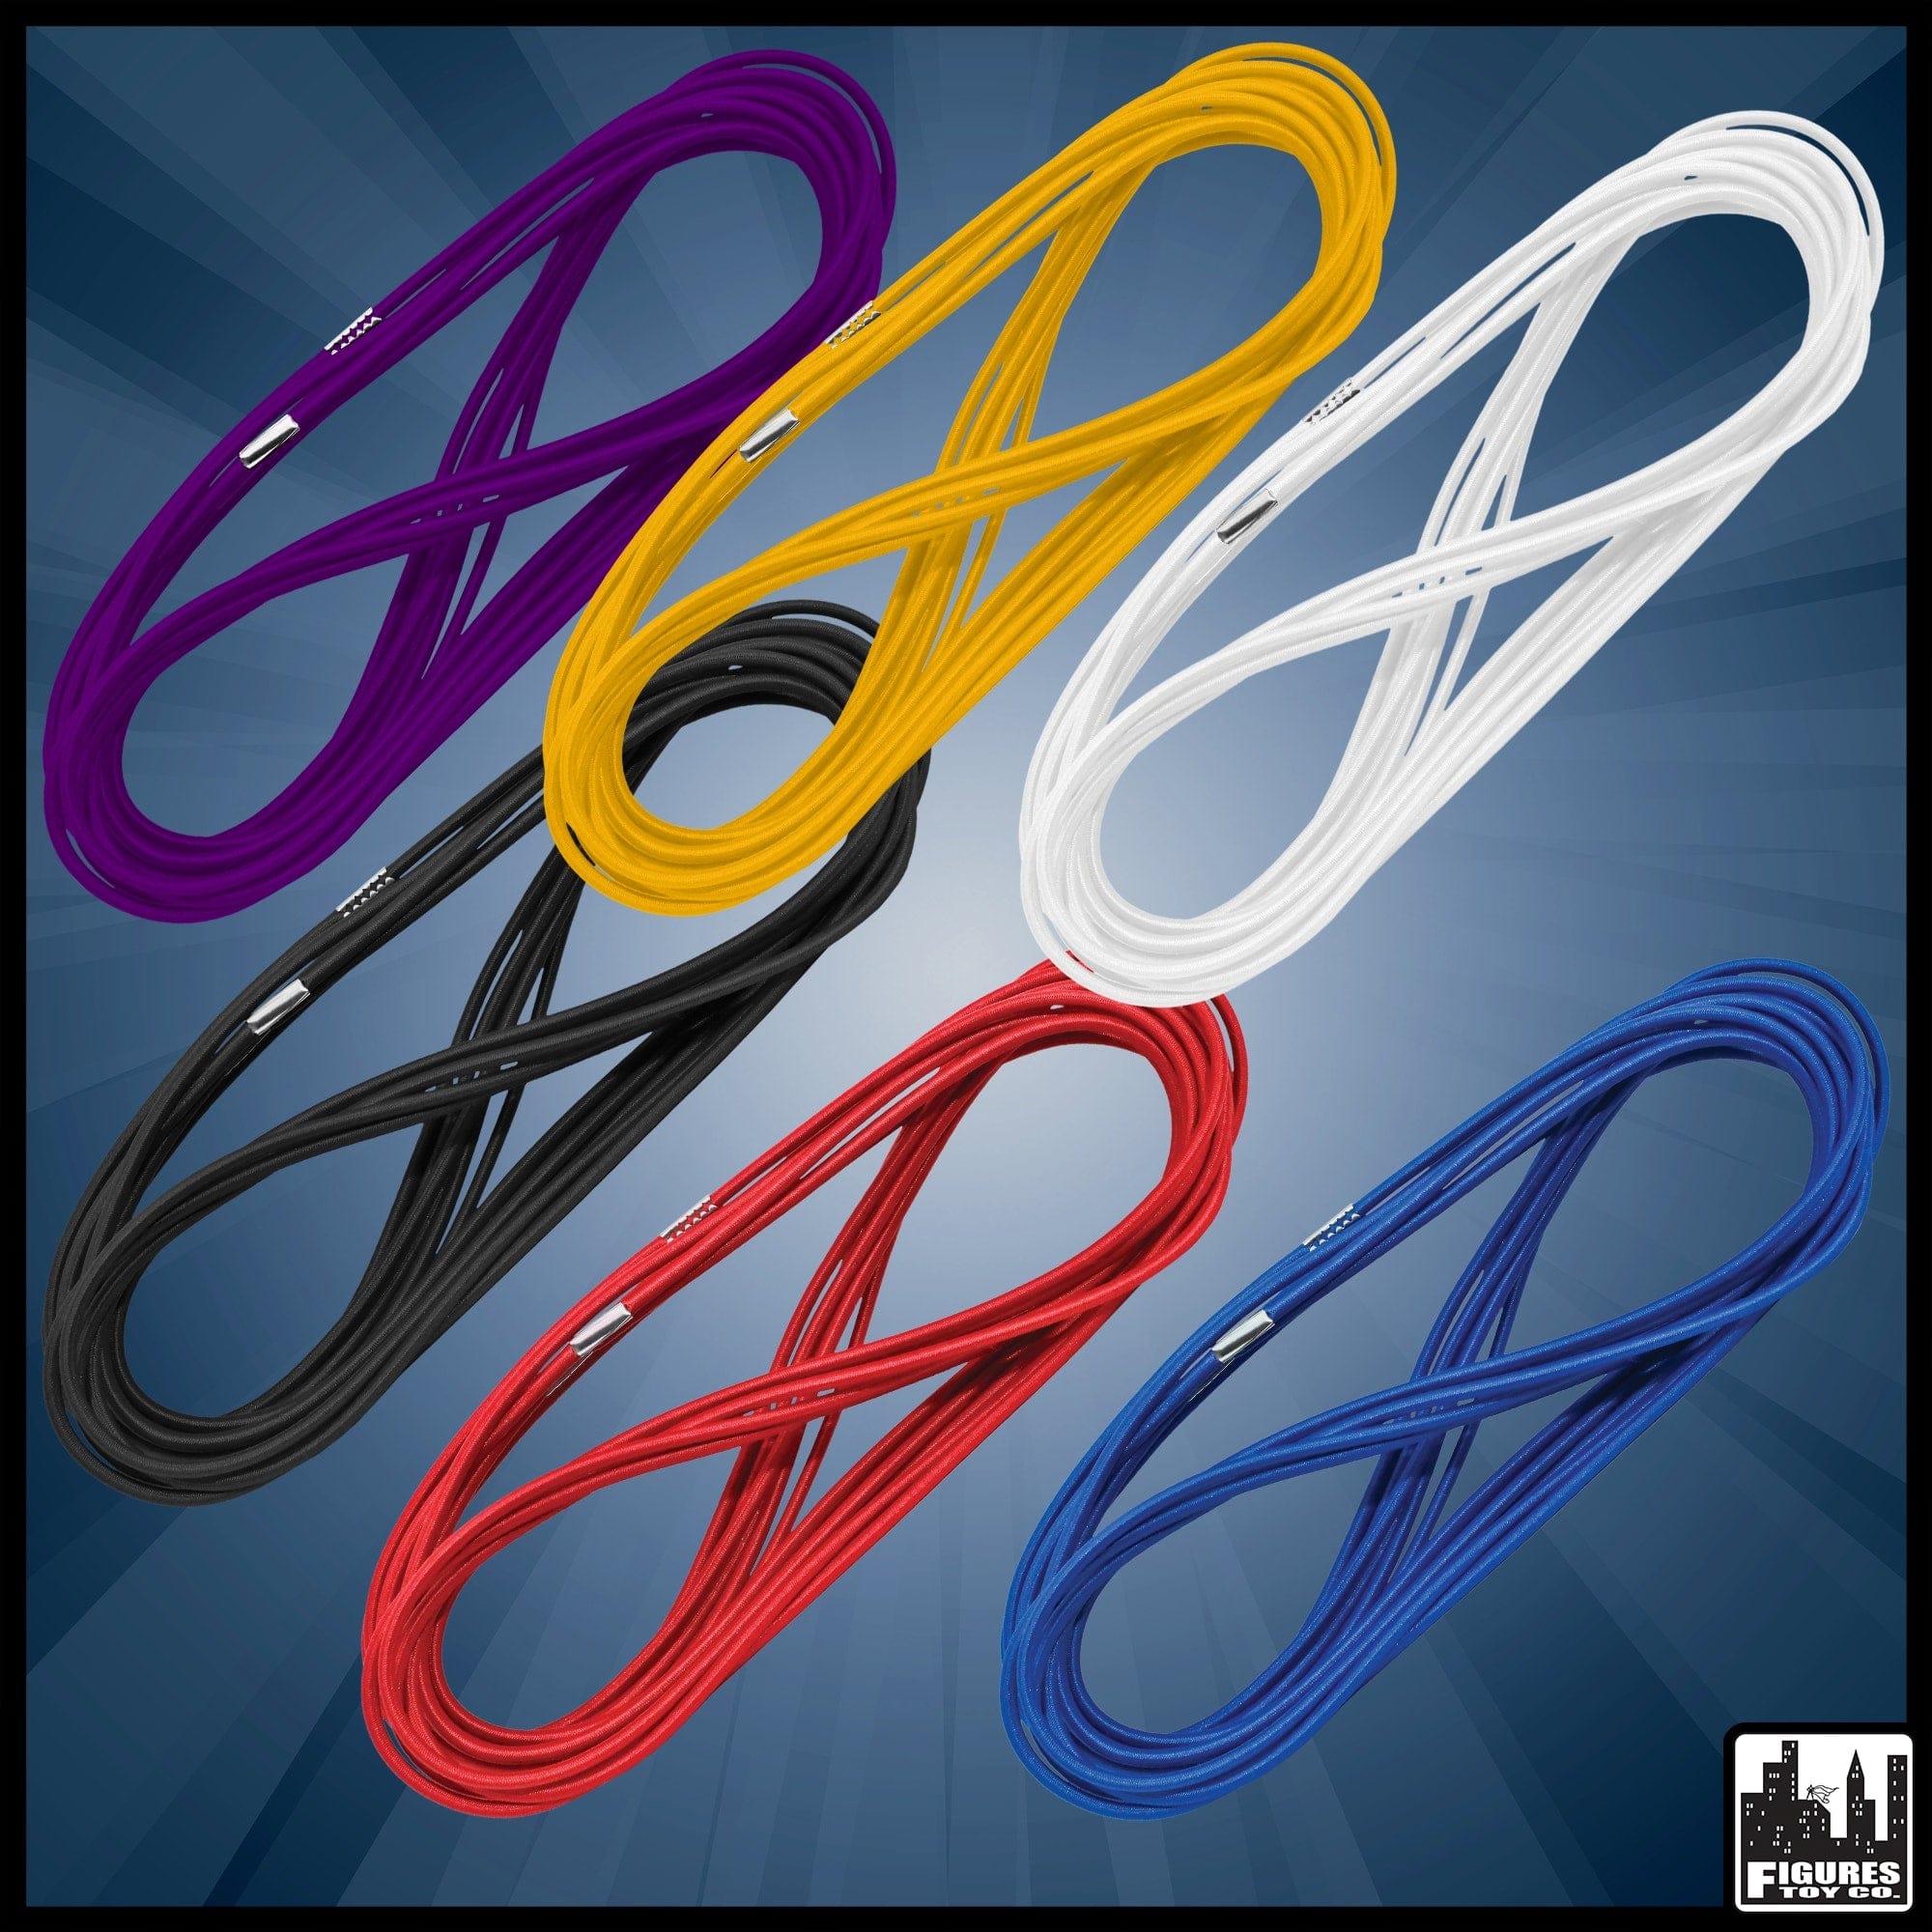 6 Sets of Ring Ropes for SMALL Wrestling Action Figure Rings